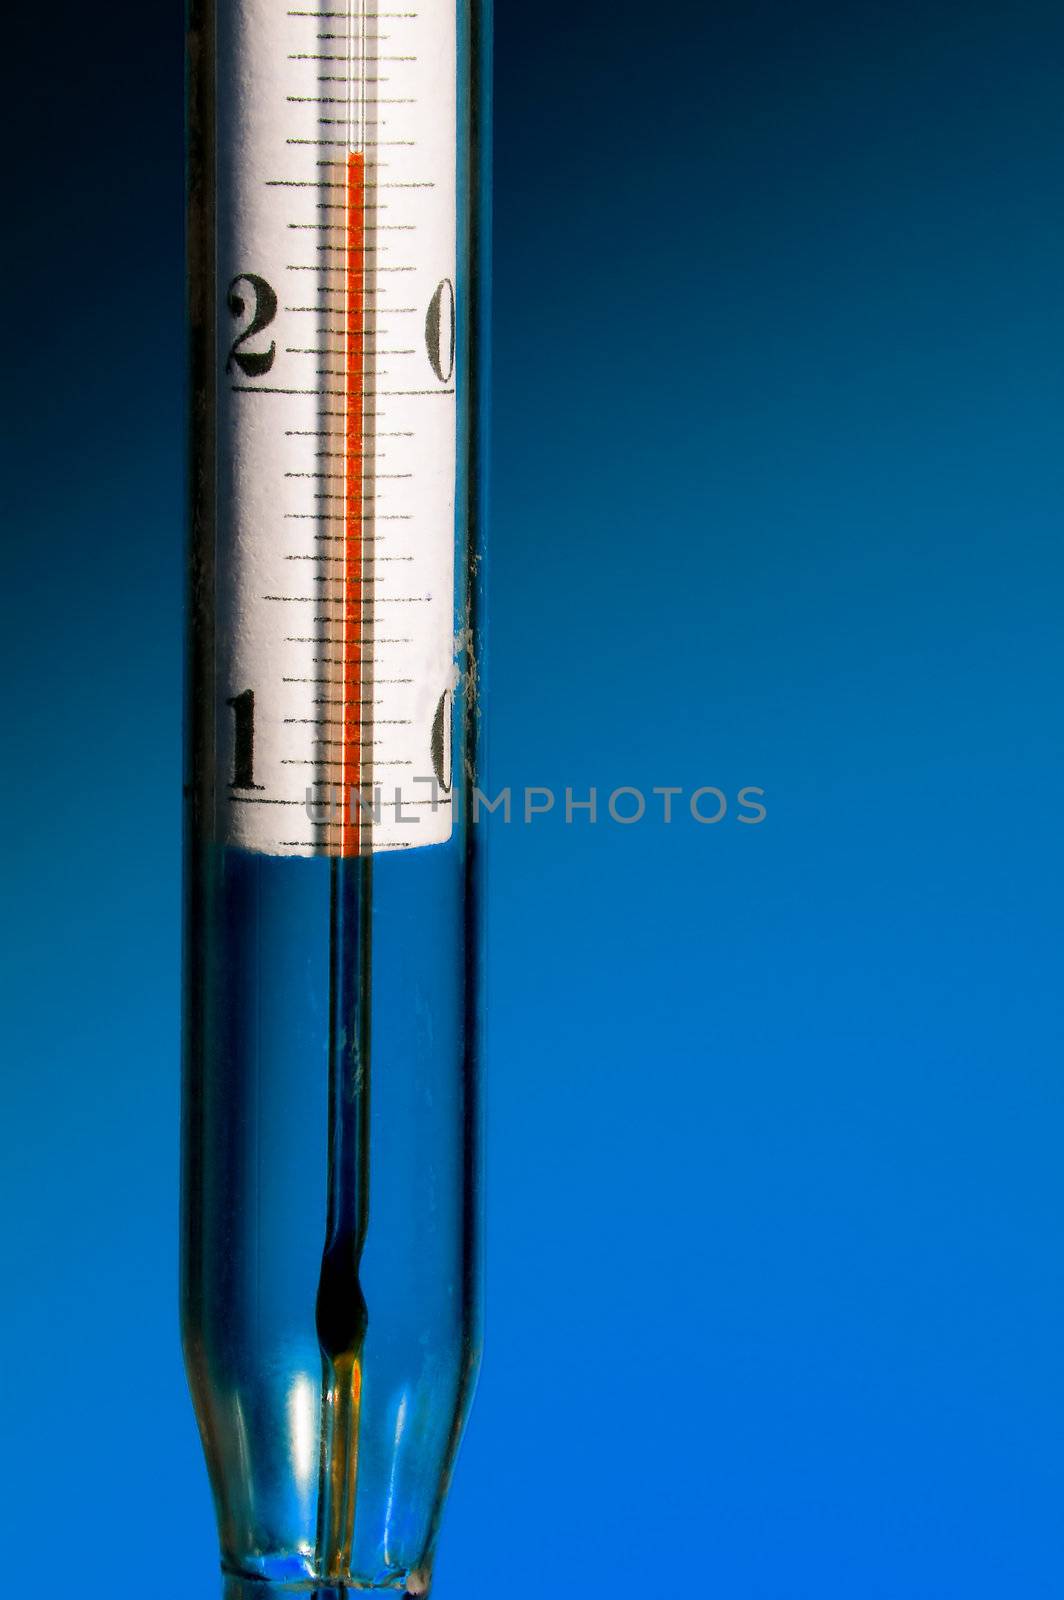 The thermometer on a dark blue background